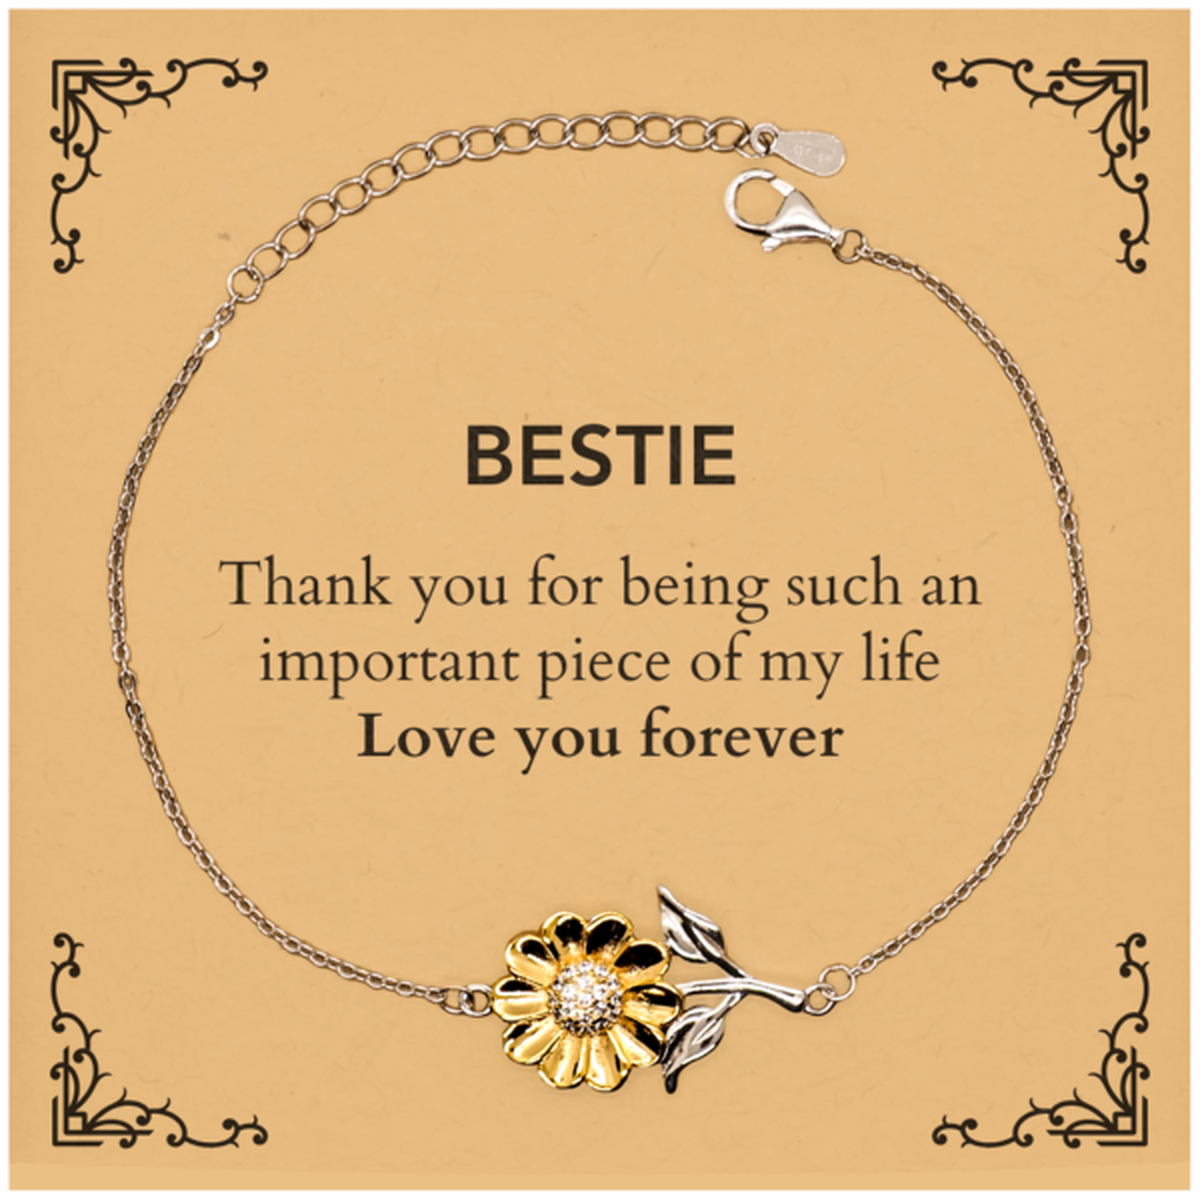 Appropriate Bestie Sunflower Bracelet Epic Birthday Gifts for Bestie Thank you for being such an important piece of my life Bestie Christmas Mothers Fathers Day